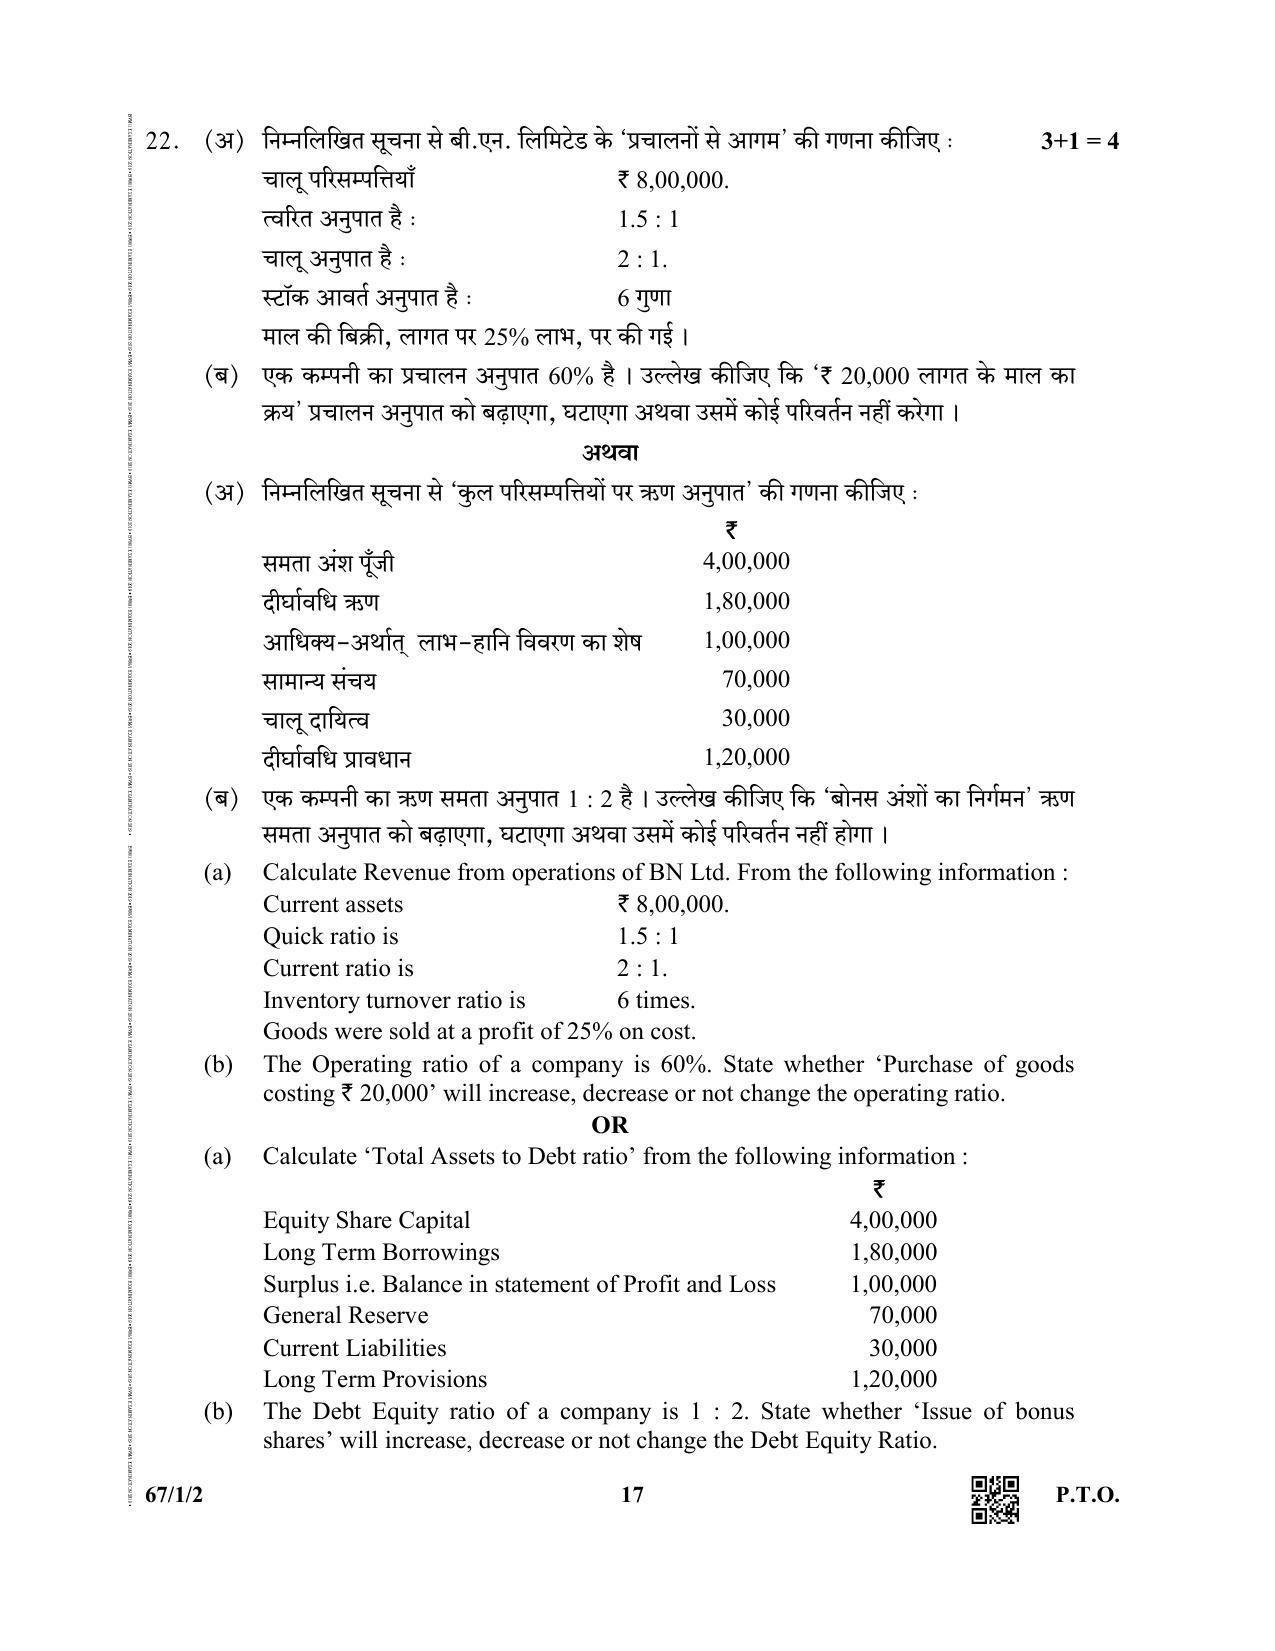 CBSE Class 12 67-1-2  (Accountancy) 2019 Question Paper - Page 17